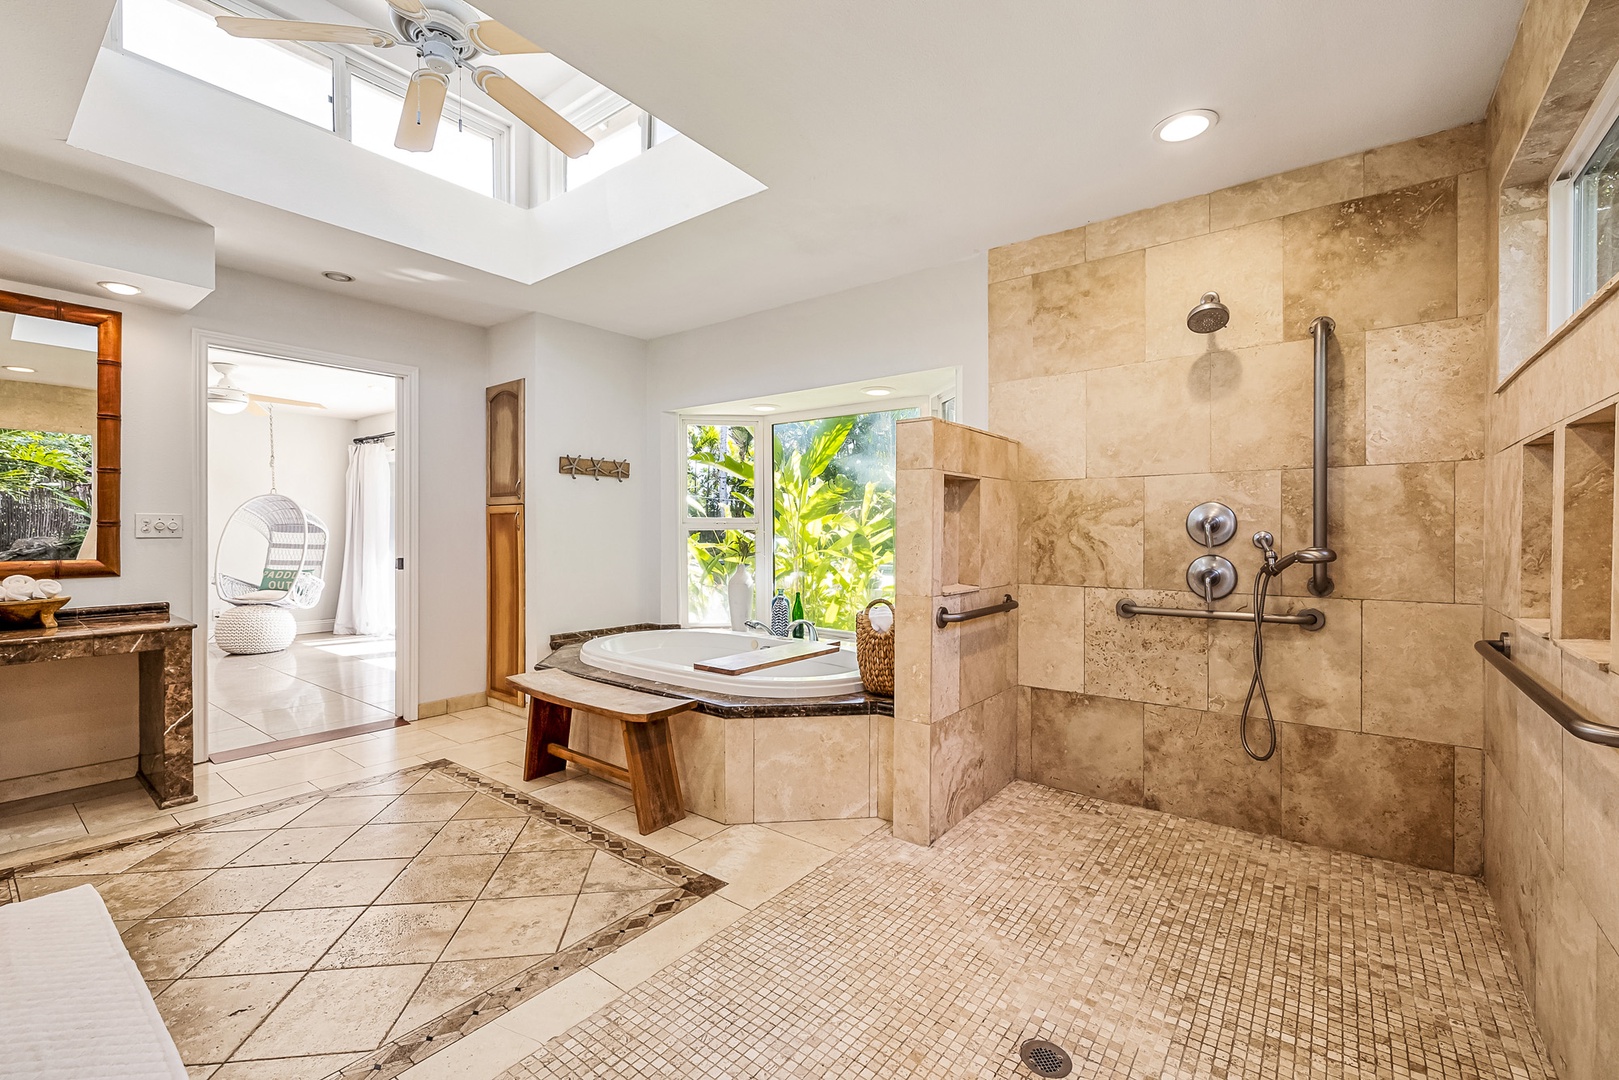 Honolulu Vacation Rentals, Hale Ho'omaha - Enjoy the open walk-in shower or take a relaxing soak in the tub